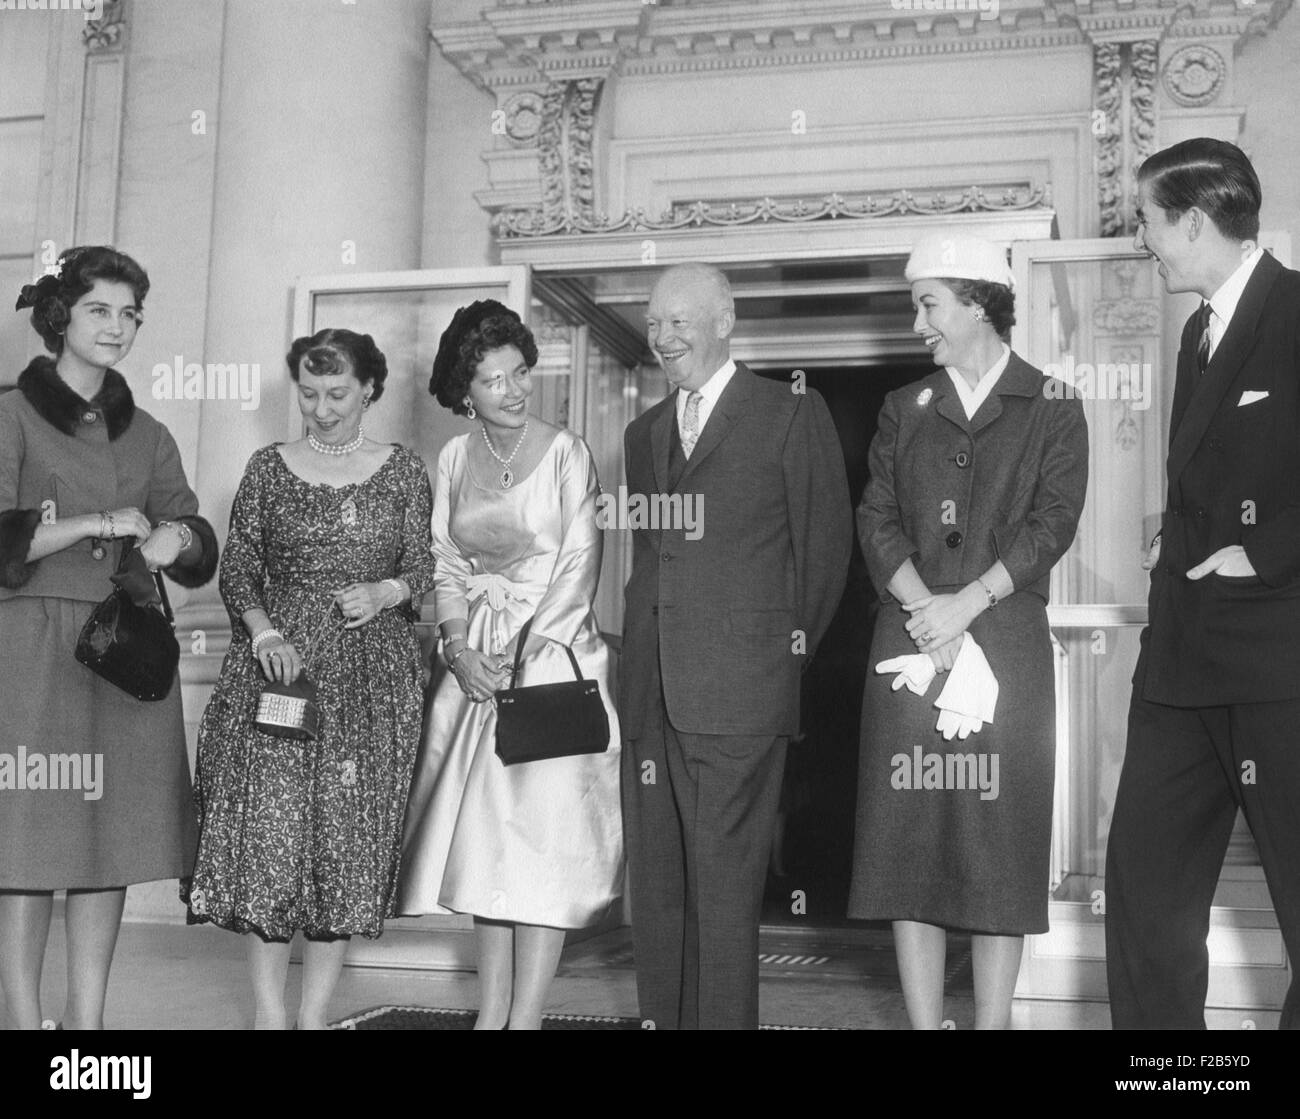 Queen Fredrika of the Hellenes (Greece) and two of her children visit the White House. L-R: Princess Sophie, Mamie Eisenhower, The President, Barbara Eisenhower, Crown Prince Constantine (Duke of Sparta). Oct. 23, 1958. - (BSLOC 2014 16 220) Stock Photo